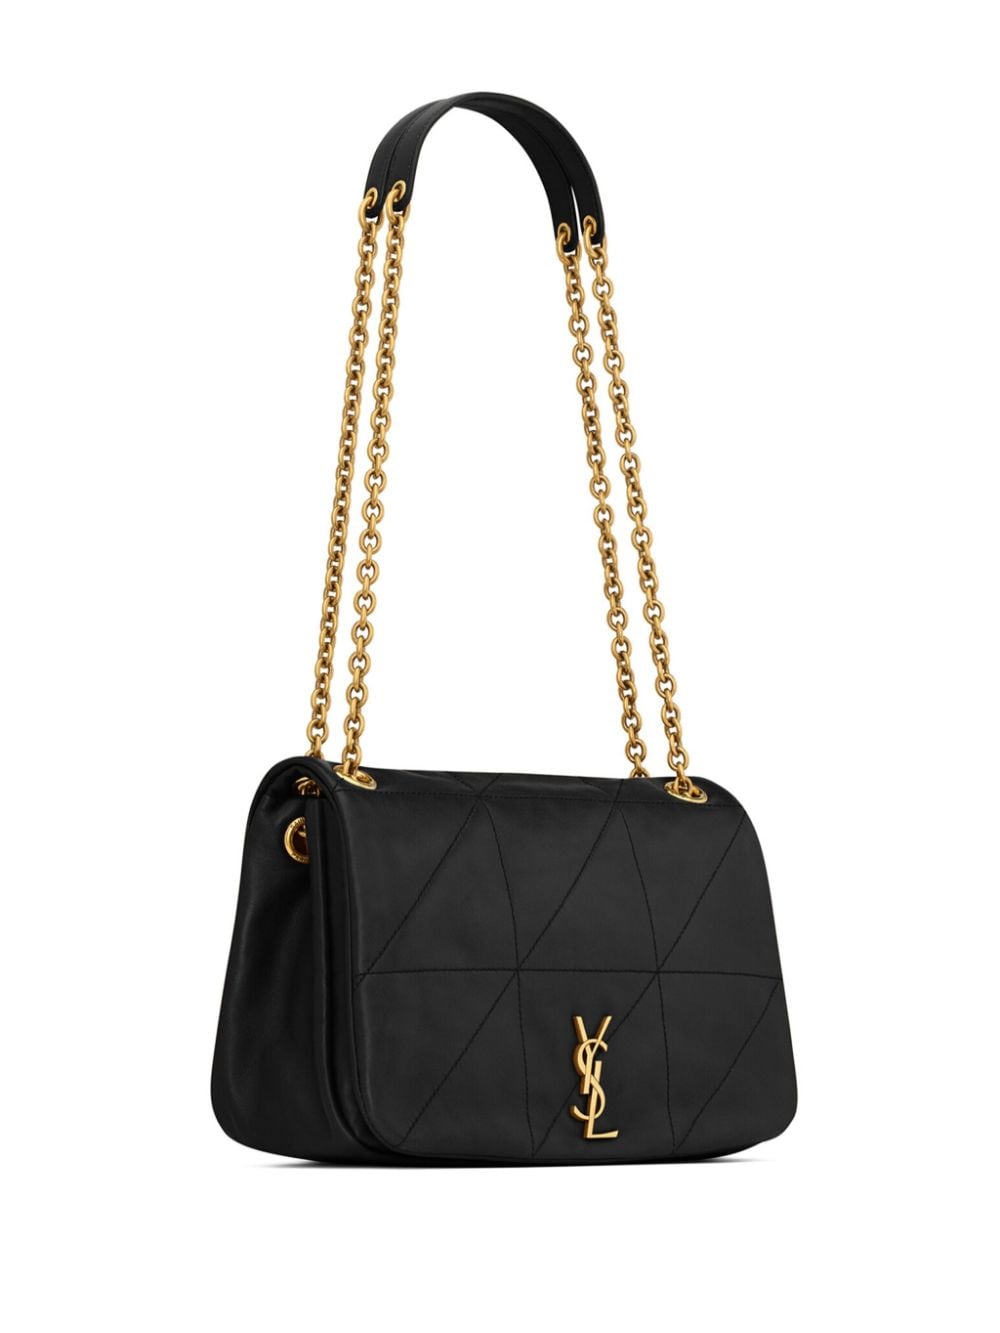 SAINT LAURENT Chic 4.3 Small Black Lambskin Shoulder Handbag for Women by Iconic French Fashion House